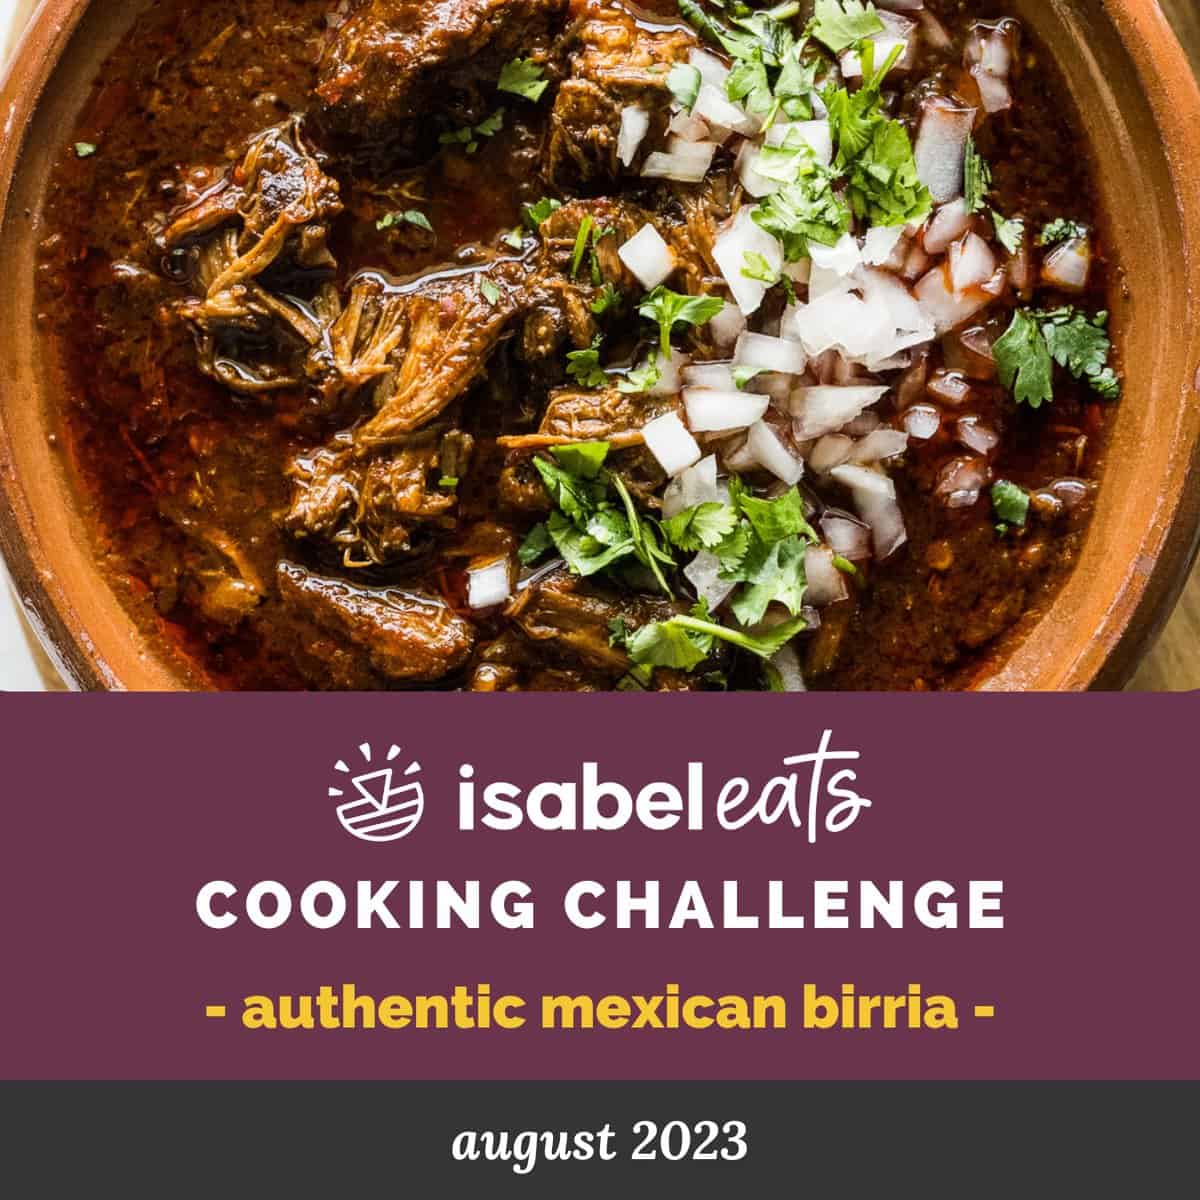 August 2023 Cooking Challenge